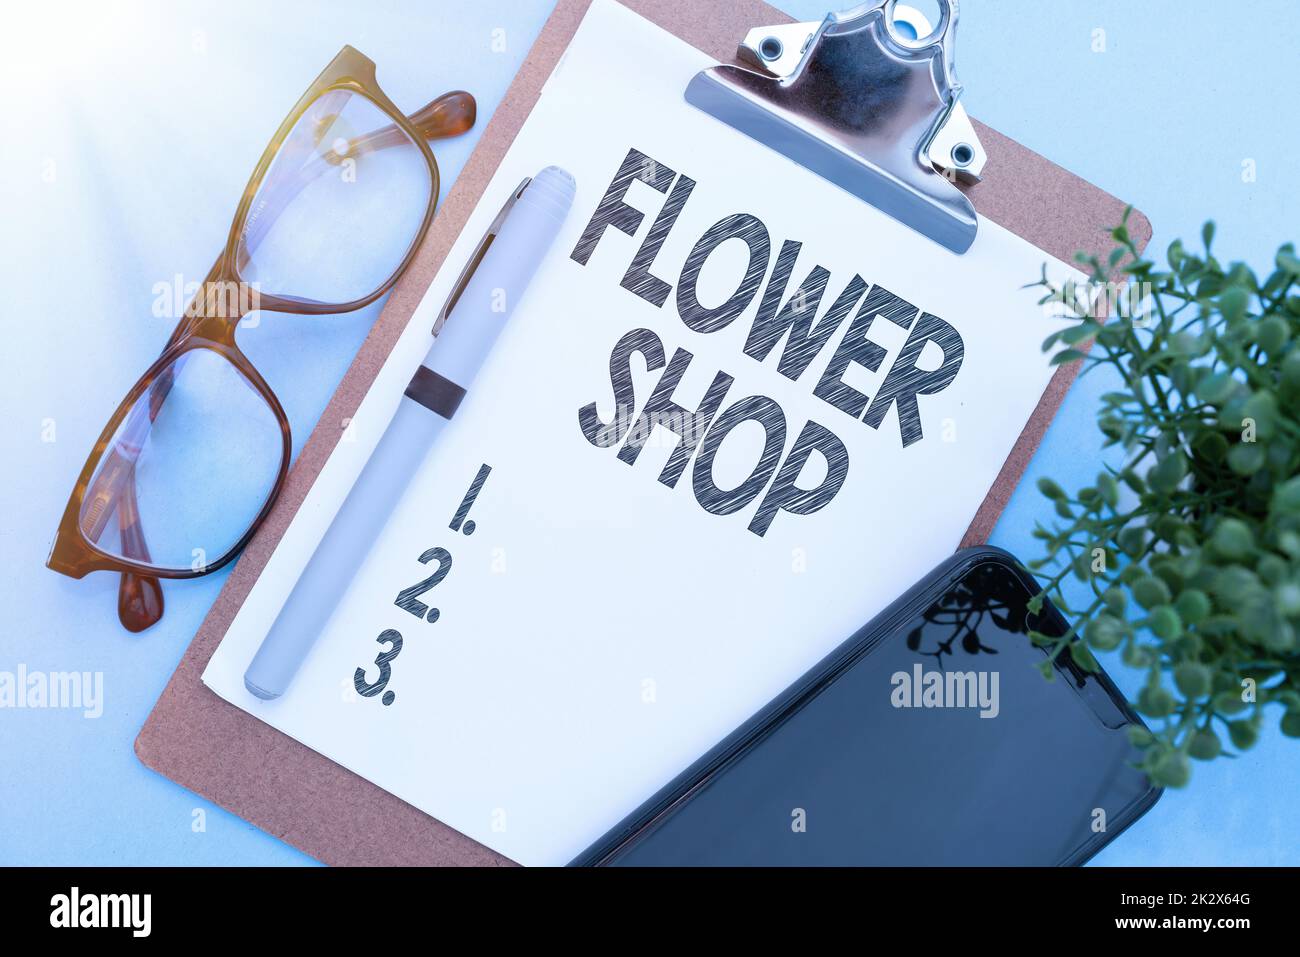 Writing displaying text Flower Shop. Business concept where cut flowers are sold with decorations for gifts Flashy School Office Supplies, Teaching Learning Collections, Writing Tools Stock Photo